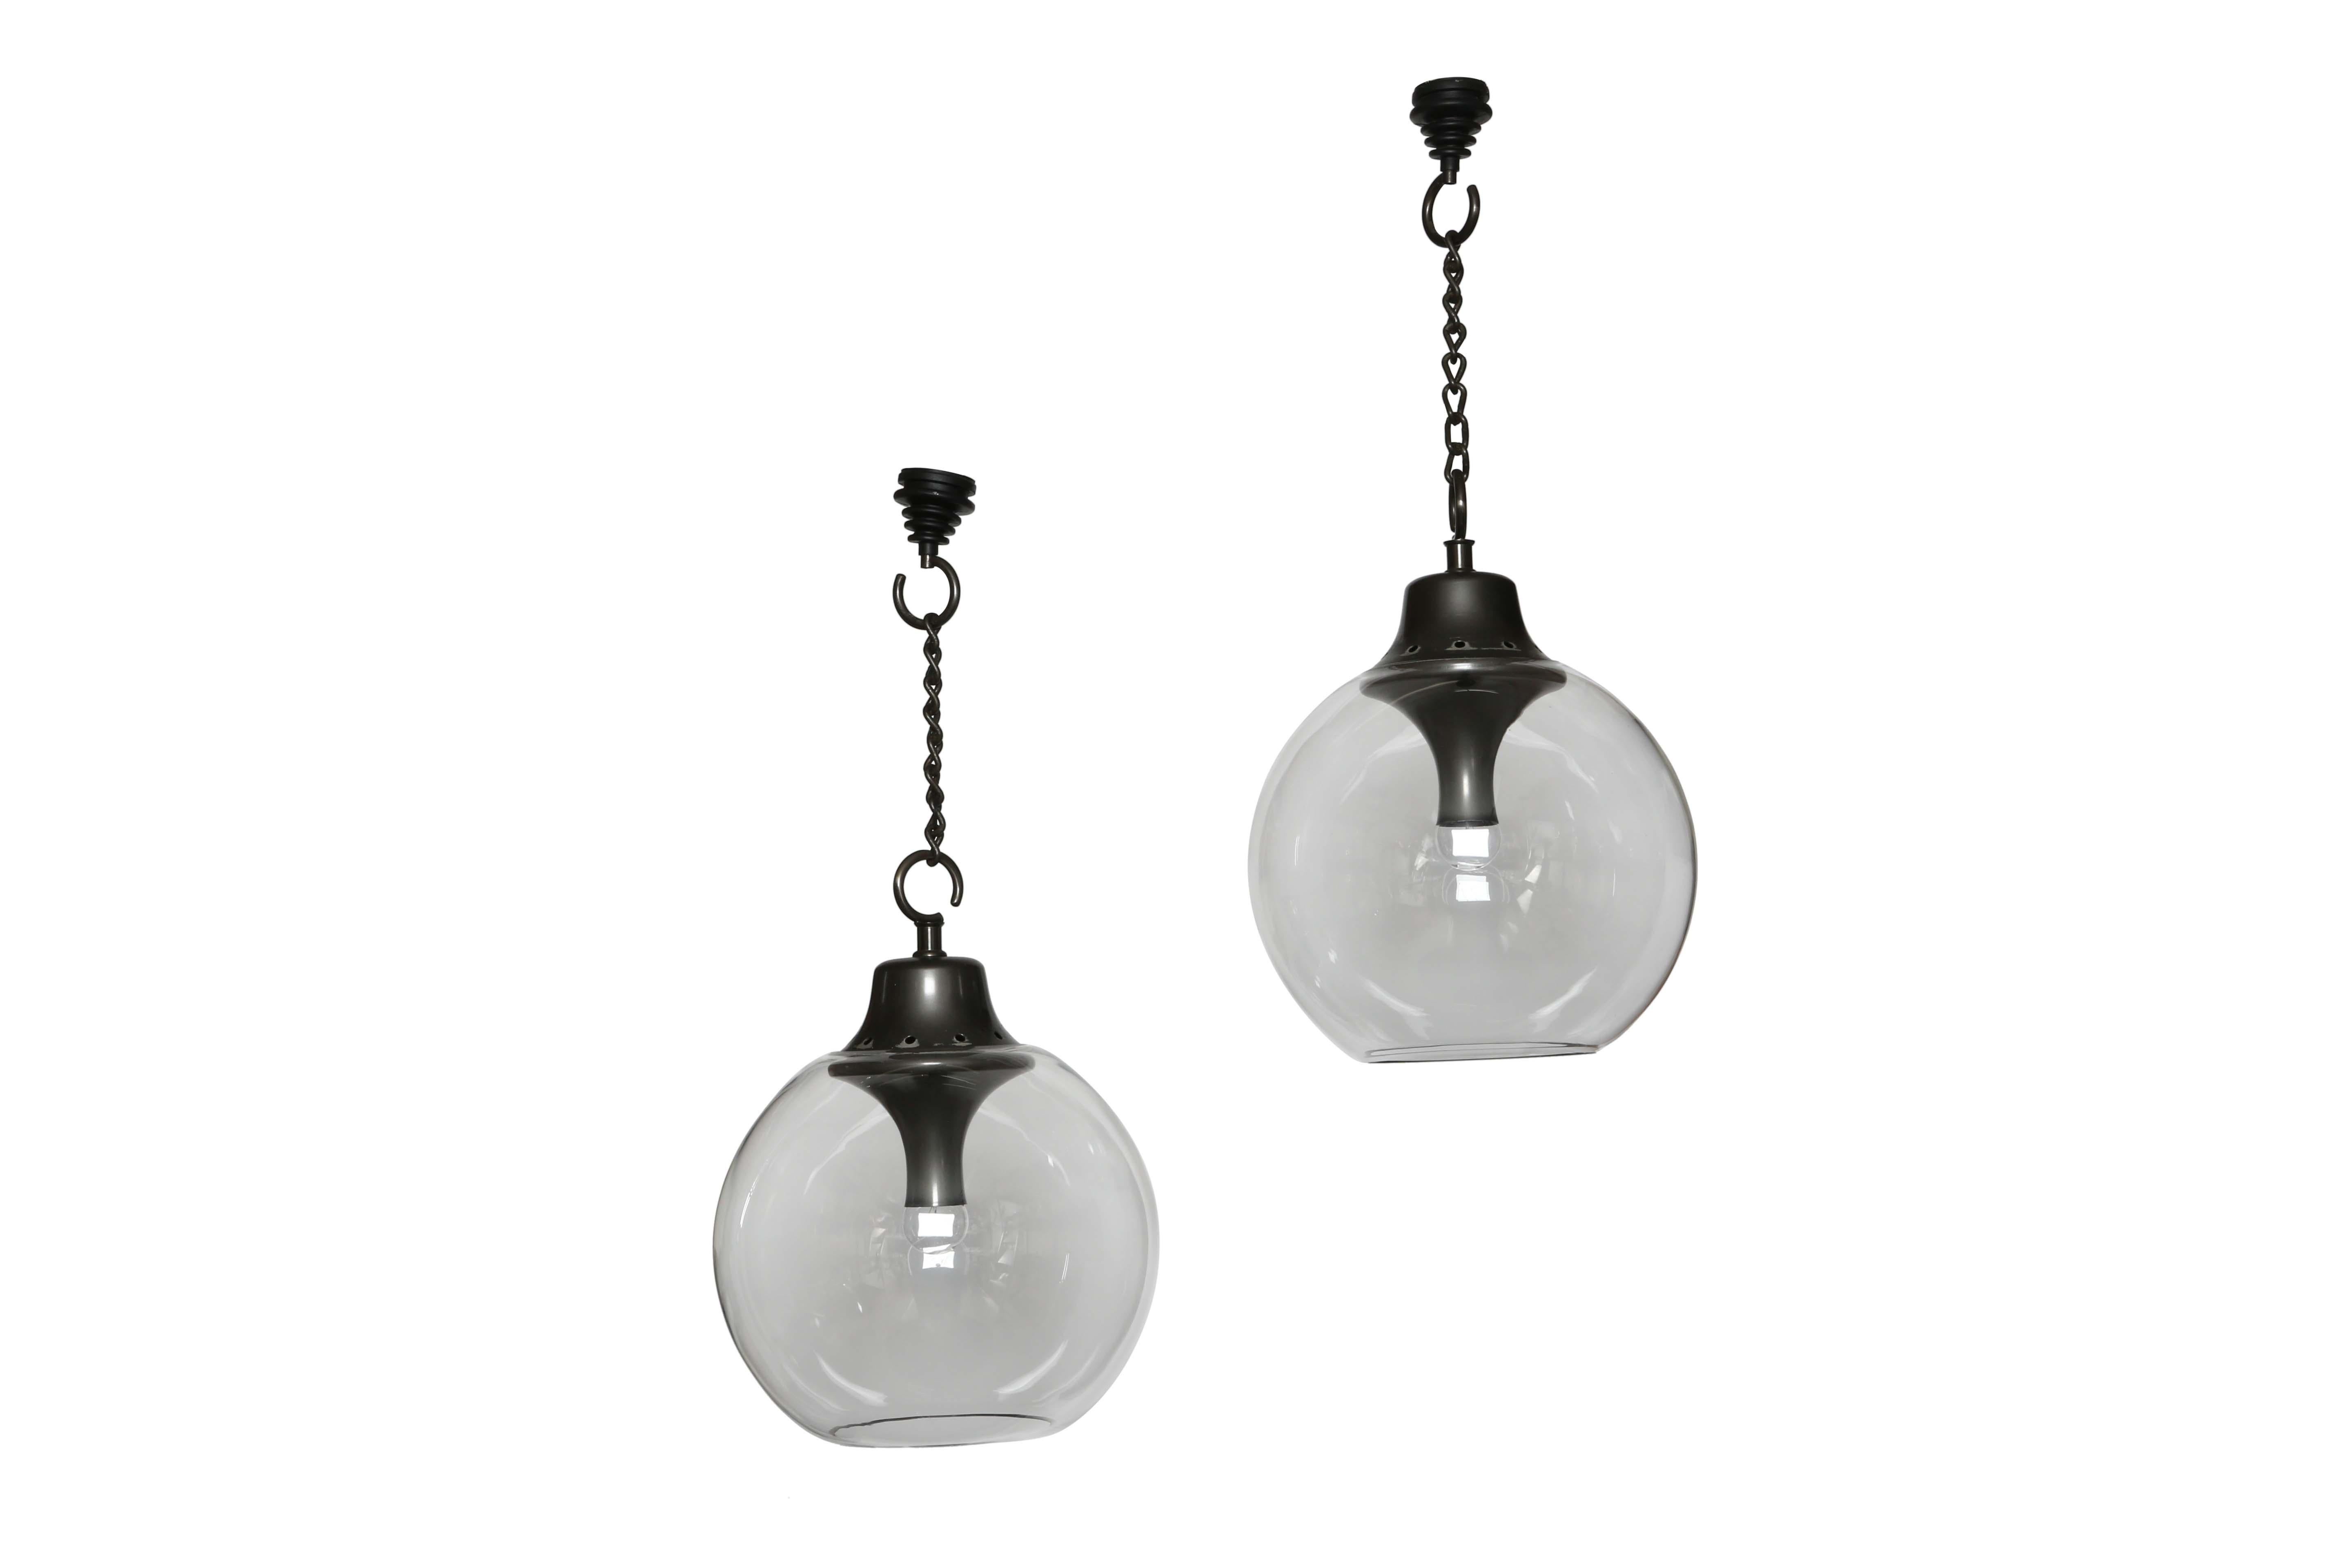 Luigi Caccia Dominioni for Azucena LS10 Ceiling Lights, a Pair In Good Condition For Sale In Brooklyn, NY